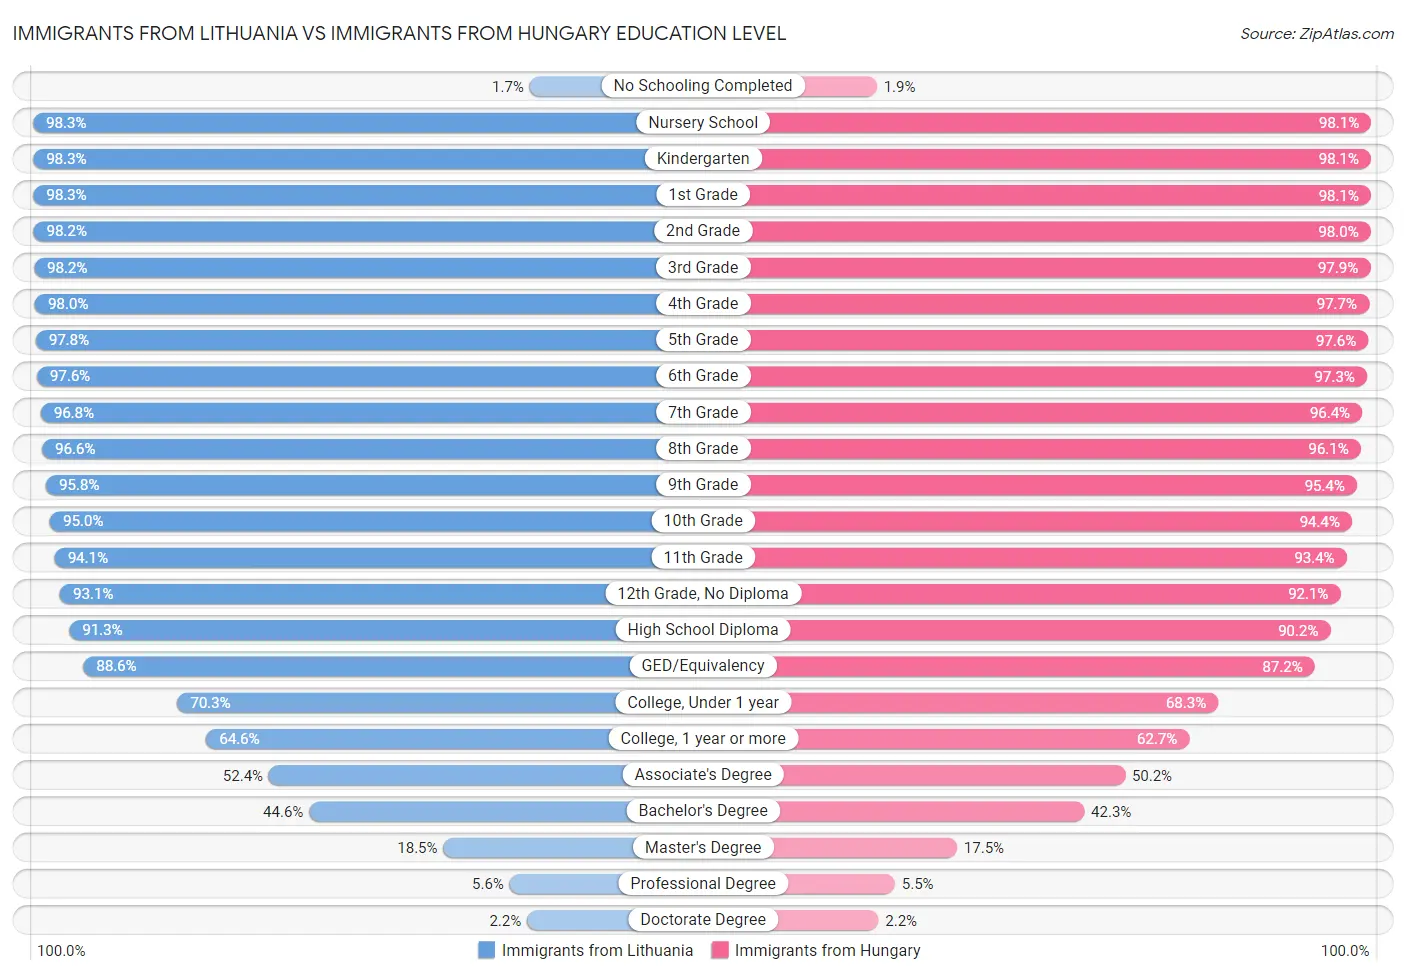 Immigrants from Lithuania vs Immigrants from Hungary Education Level